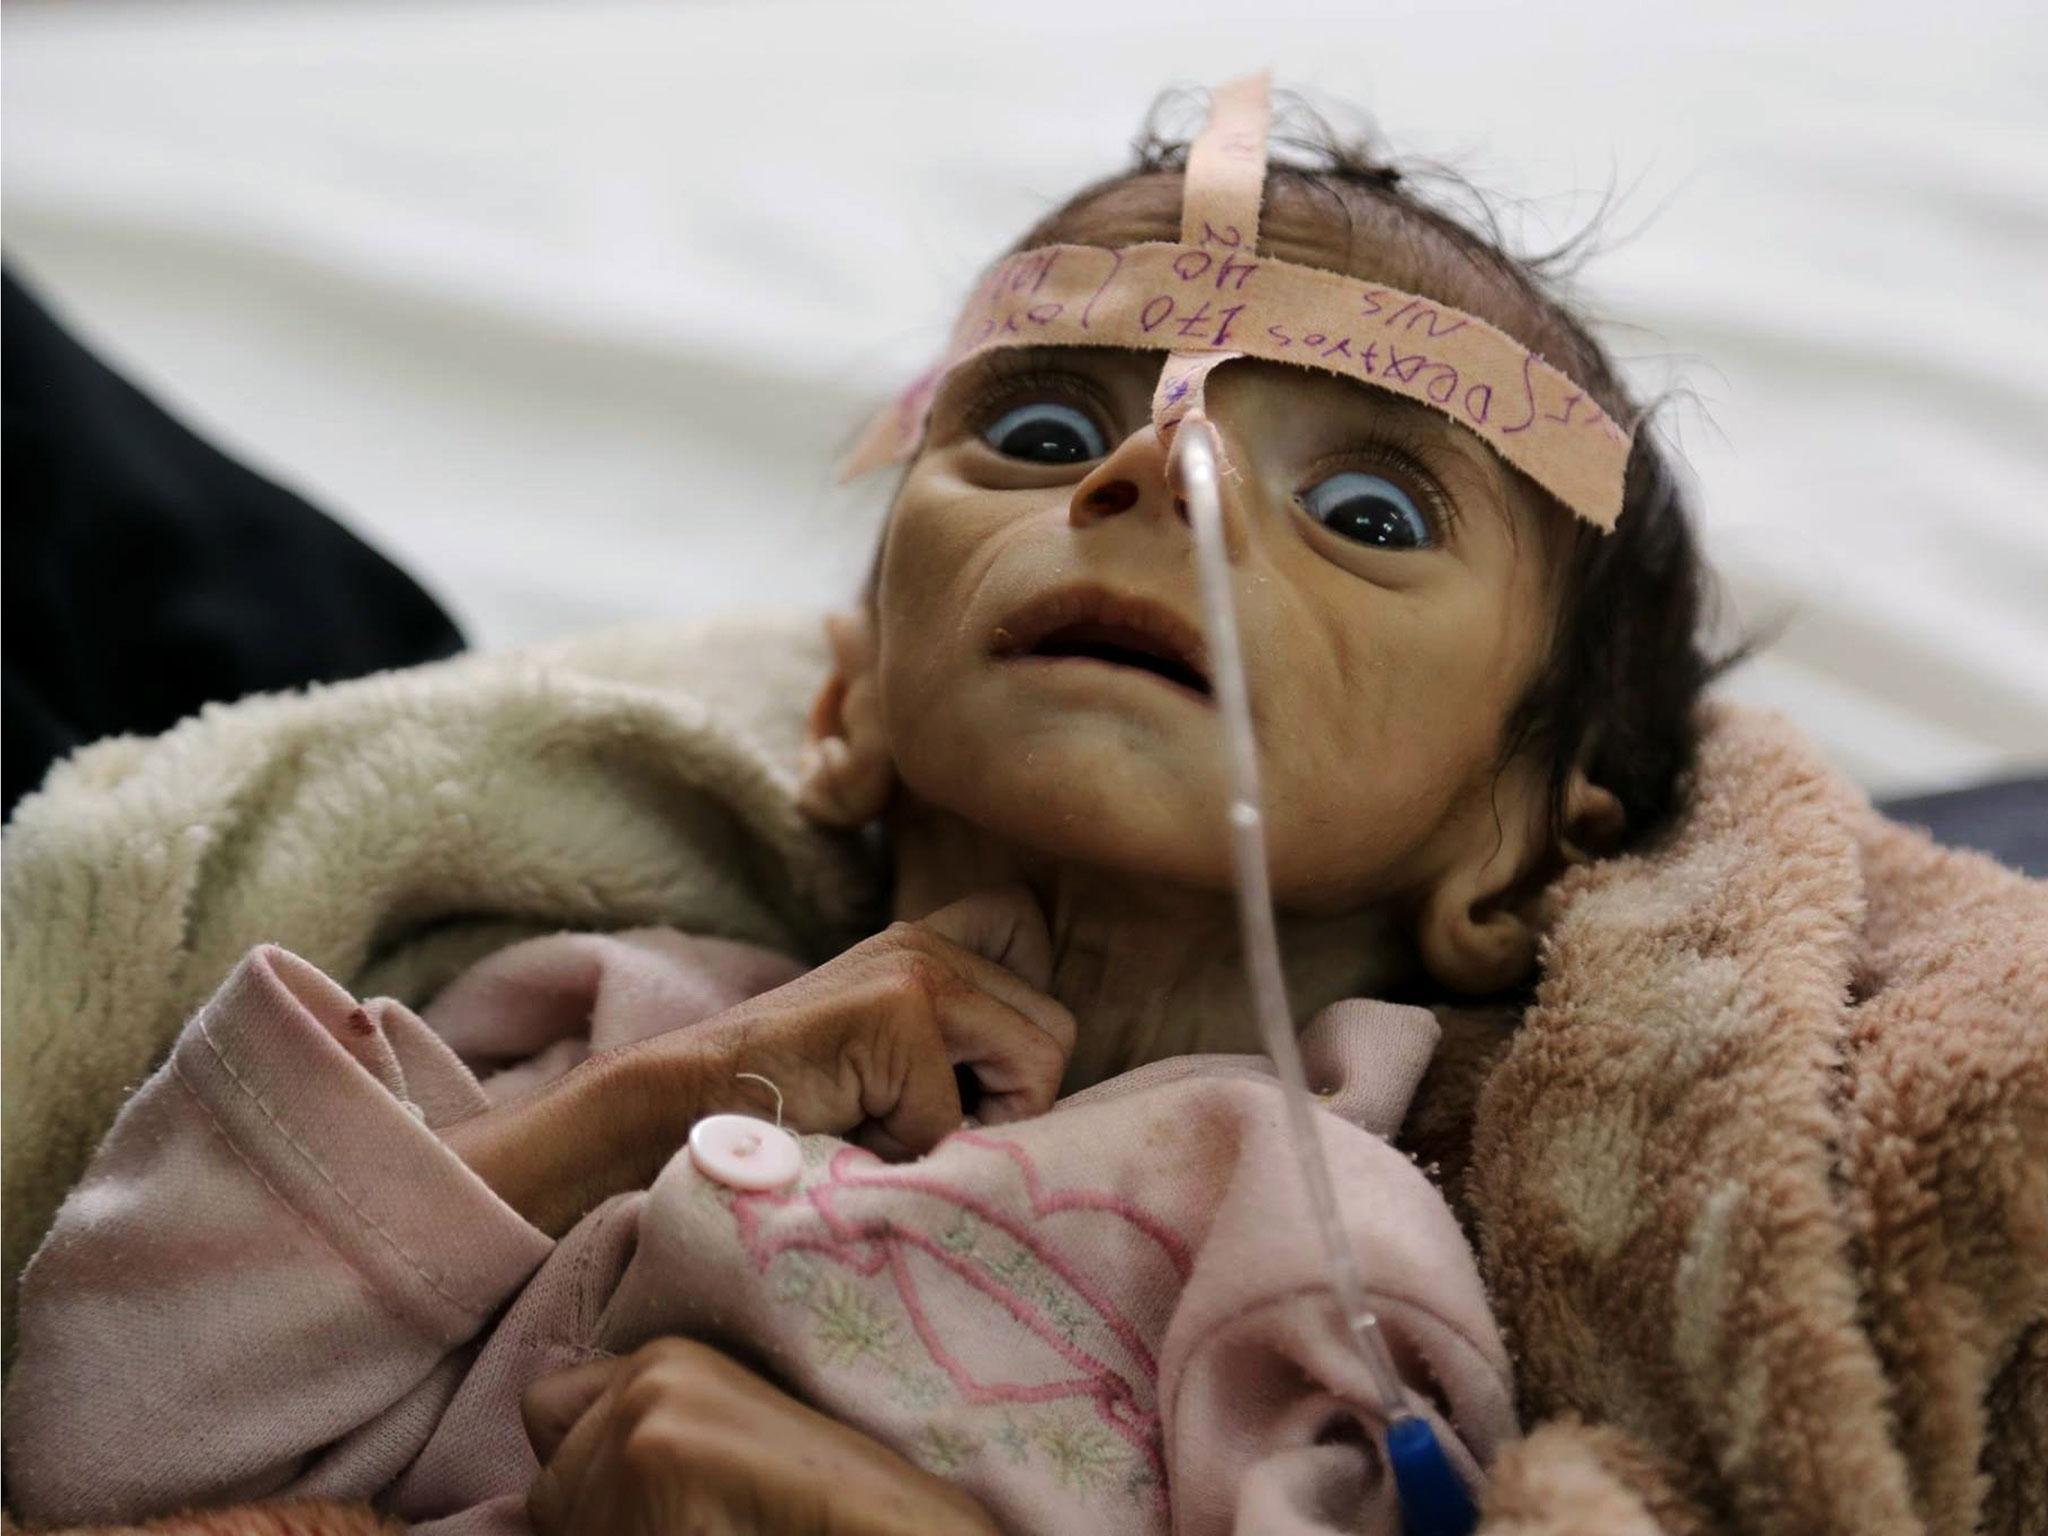 Udai Faisal, an infant suffering from acute malnutrition, at Al-Sabeen Hospital in Sanaa, Yemen, on 22 March, 2016. Udai died on 24 March